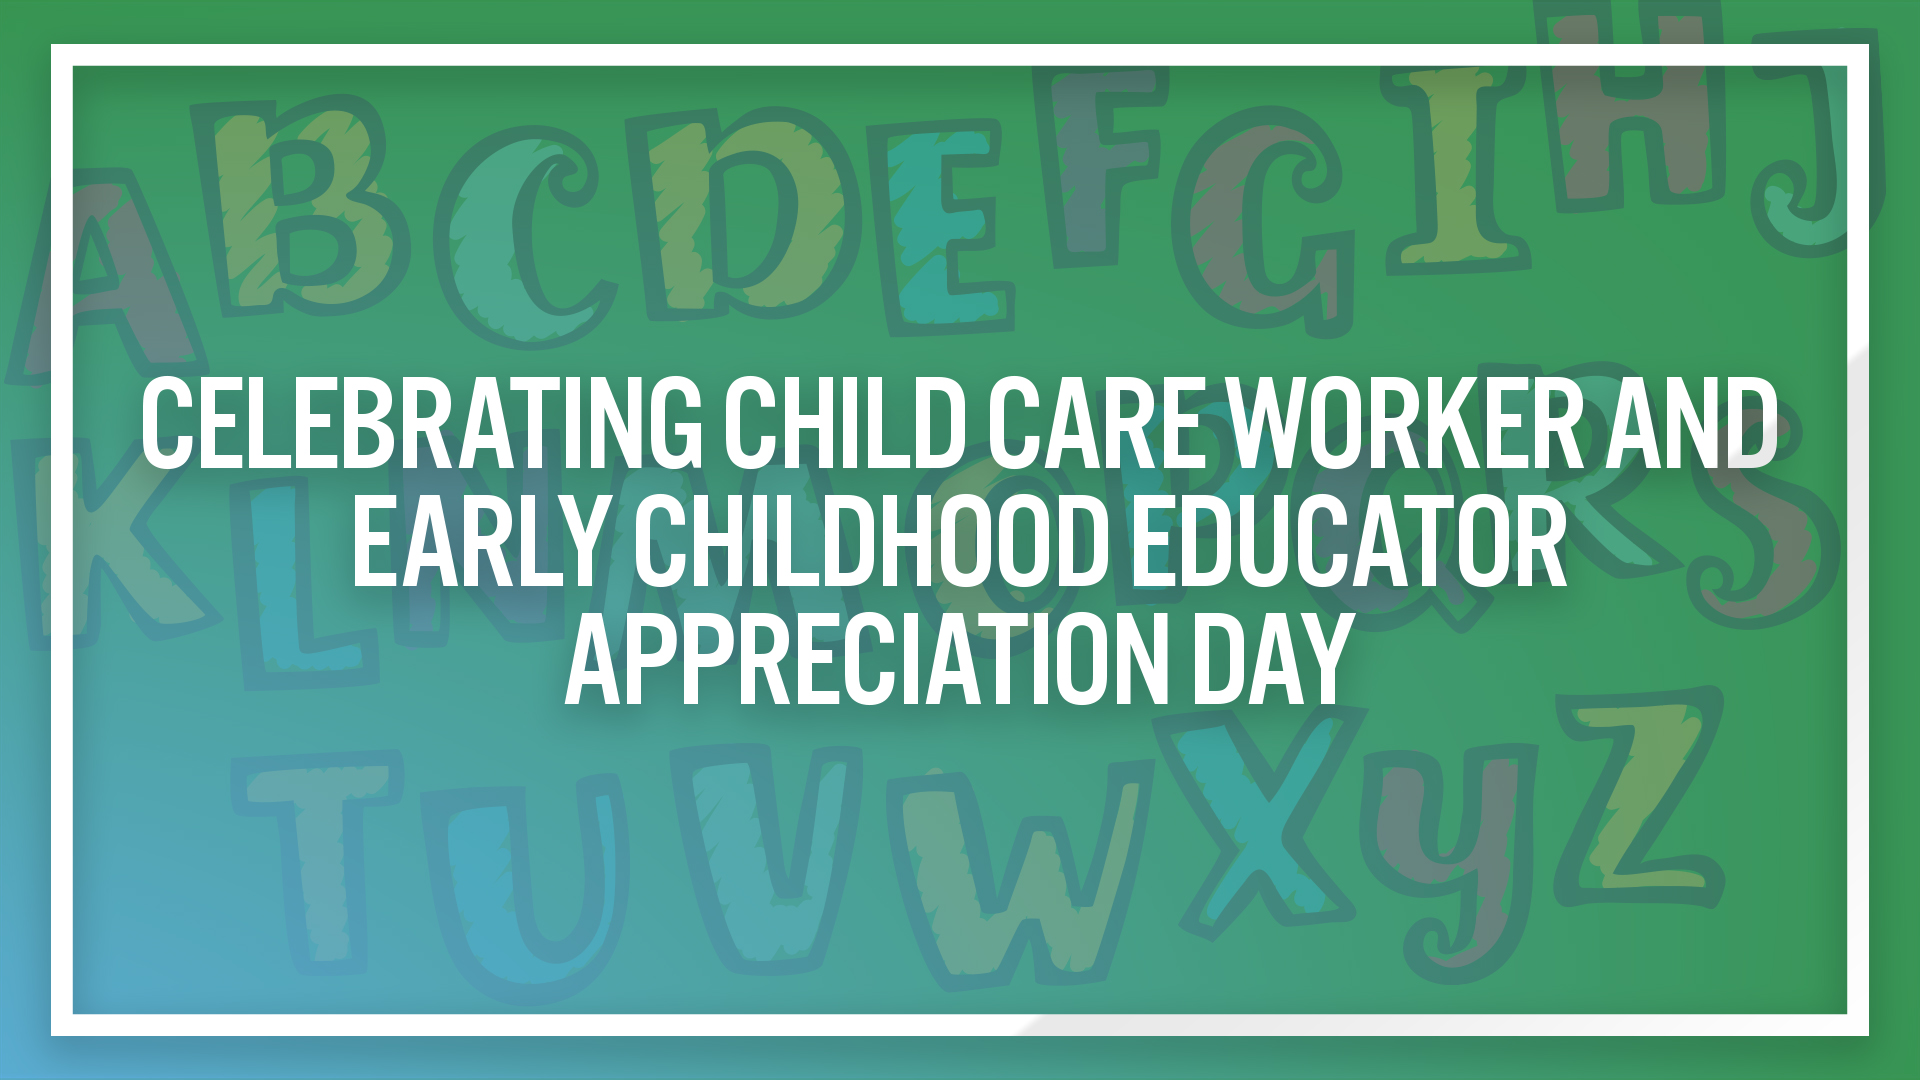 Celebrating Child Care Worker and Early Childhood Educator Appreciation Day